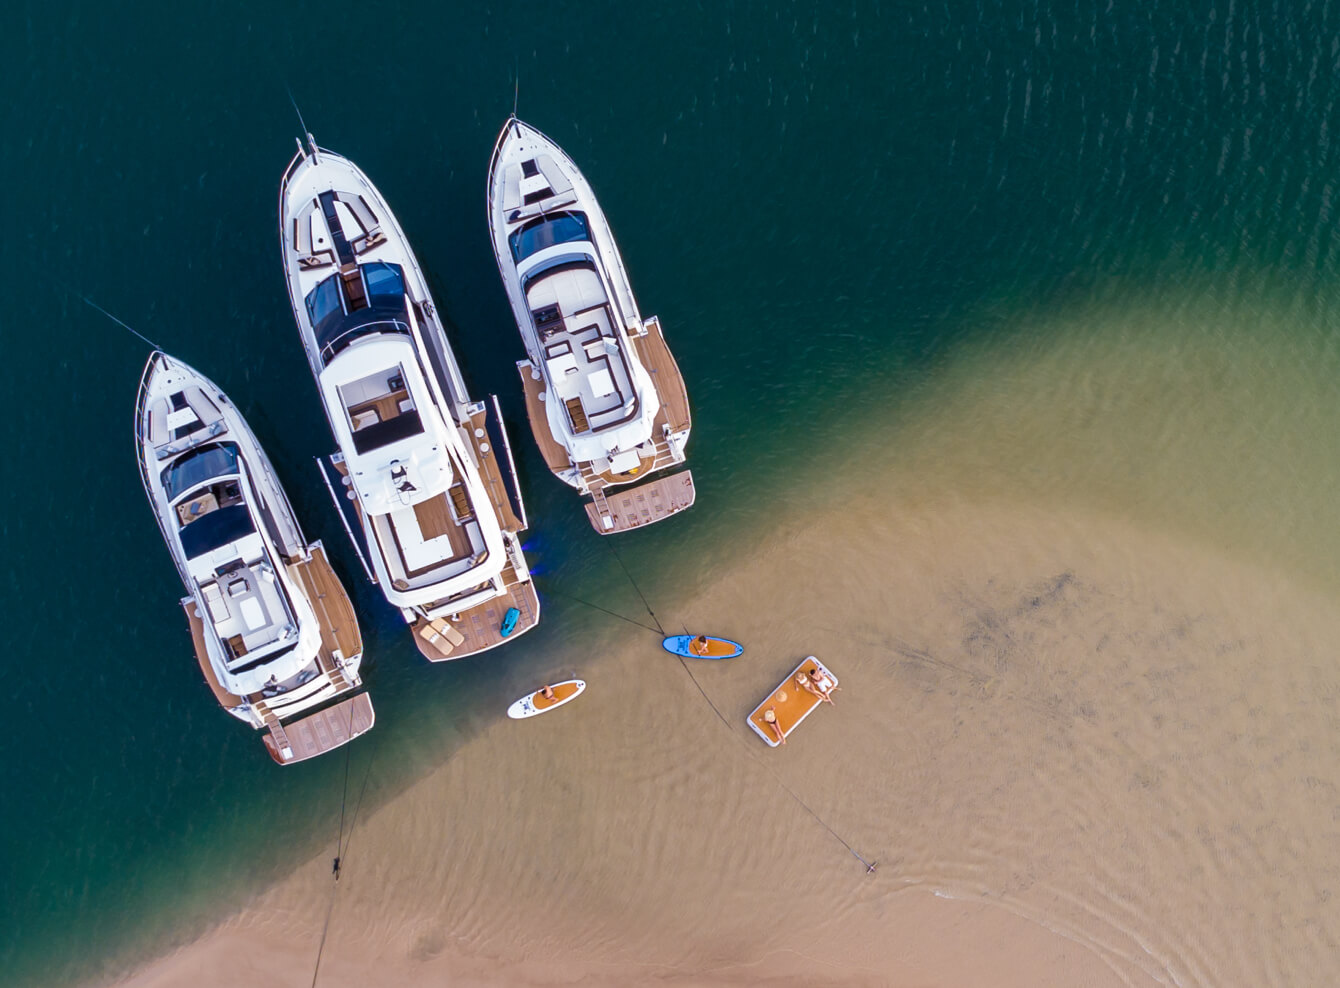 Three Galeon yachts anchored in the water with paddleboards behind them near the sand